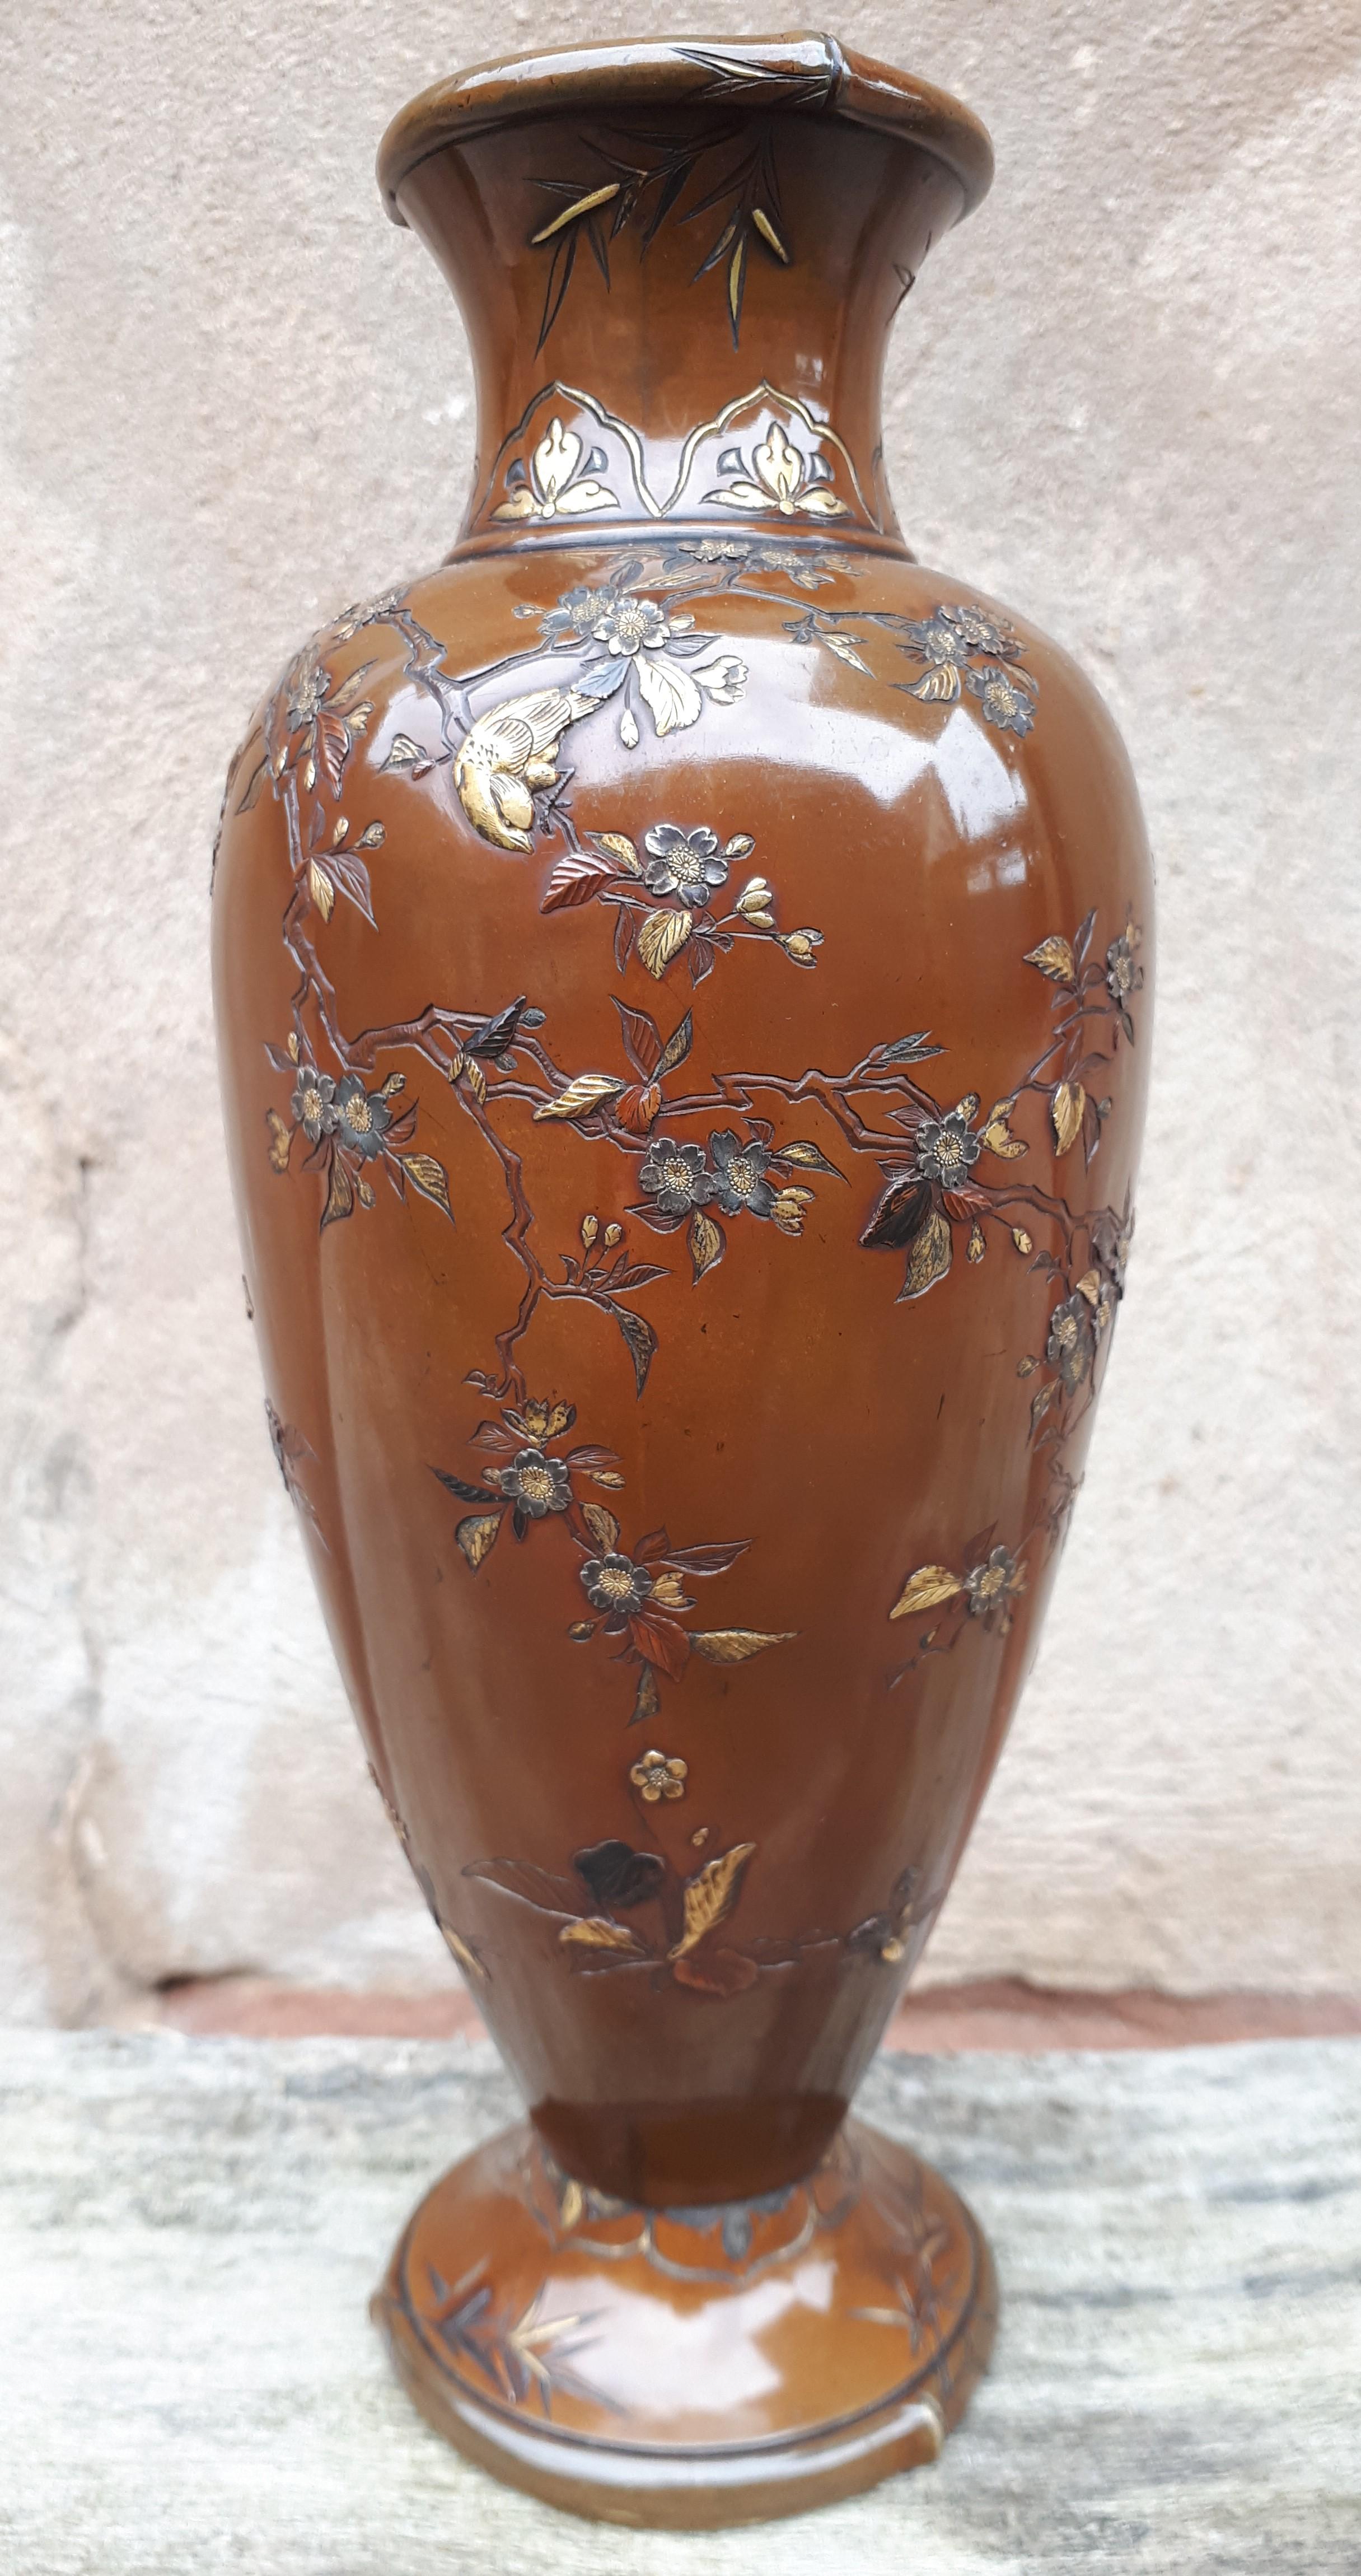 Bronze vase with inlaid decoration of birds and butterflies among cherry blossom branches, the neck and base with bamboo motif. The inlays are in hira and taka zogan in gold, silver, shakudo and sentoku. Signed Inoue zo in a cartouche on the